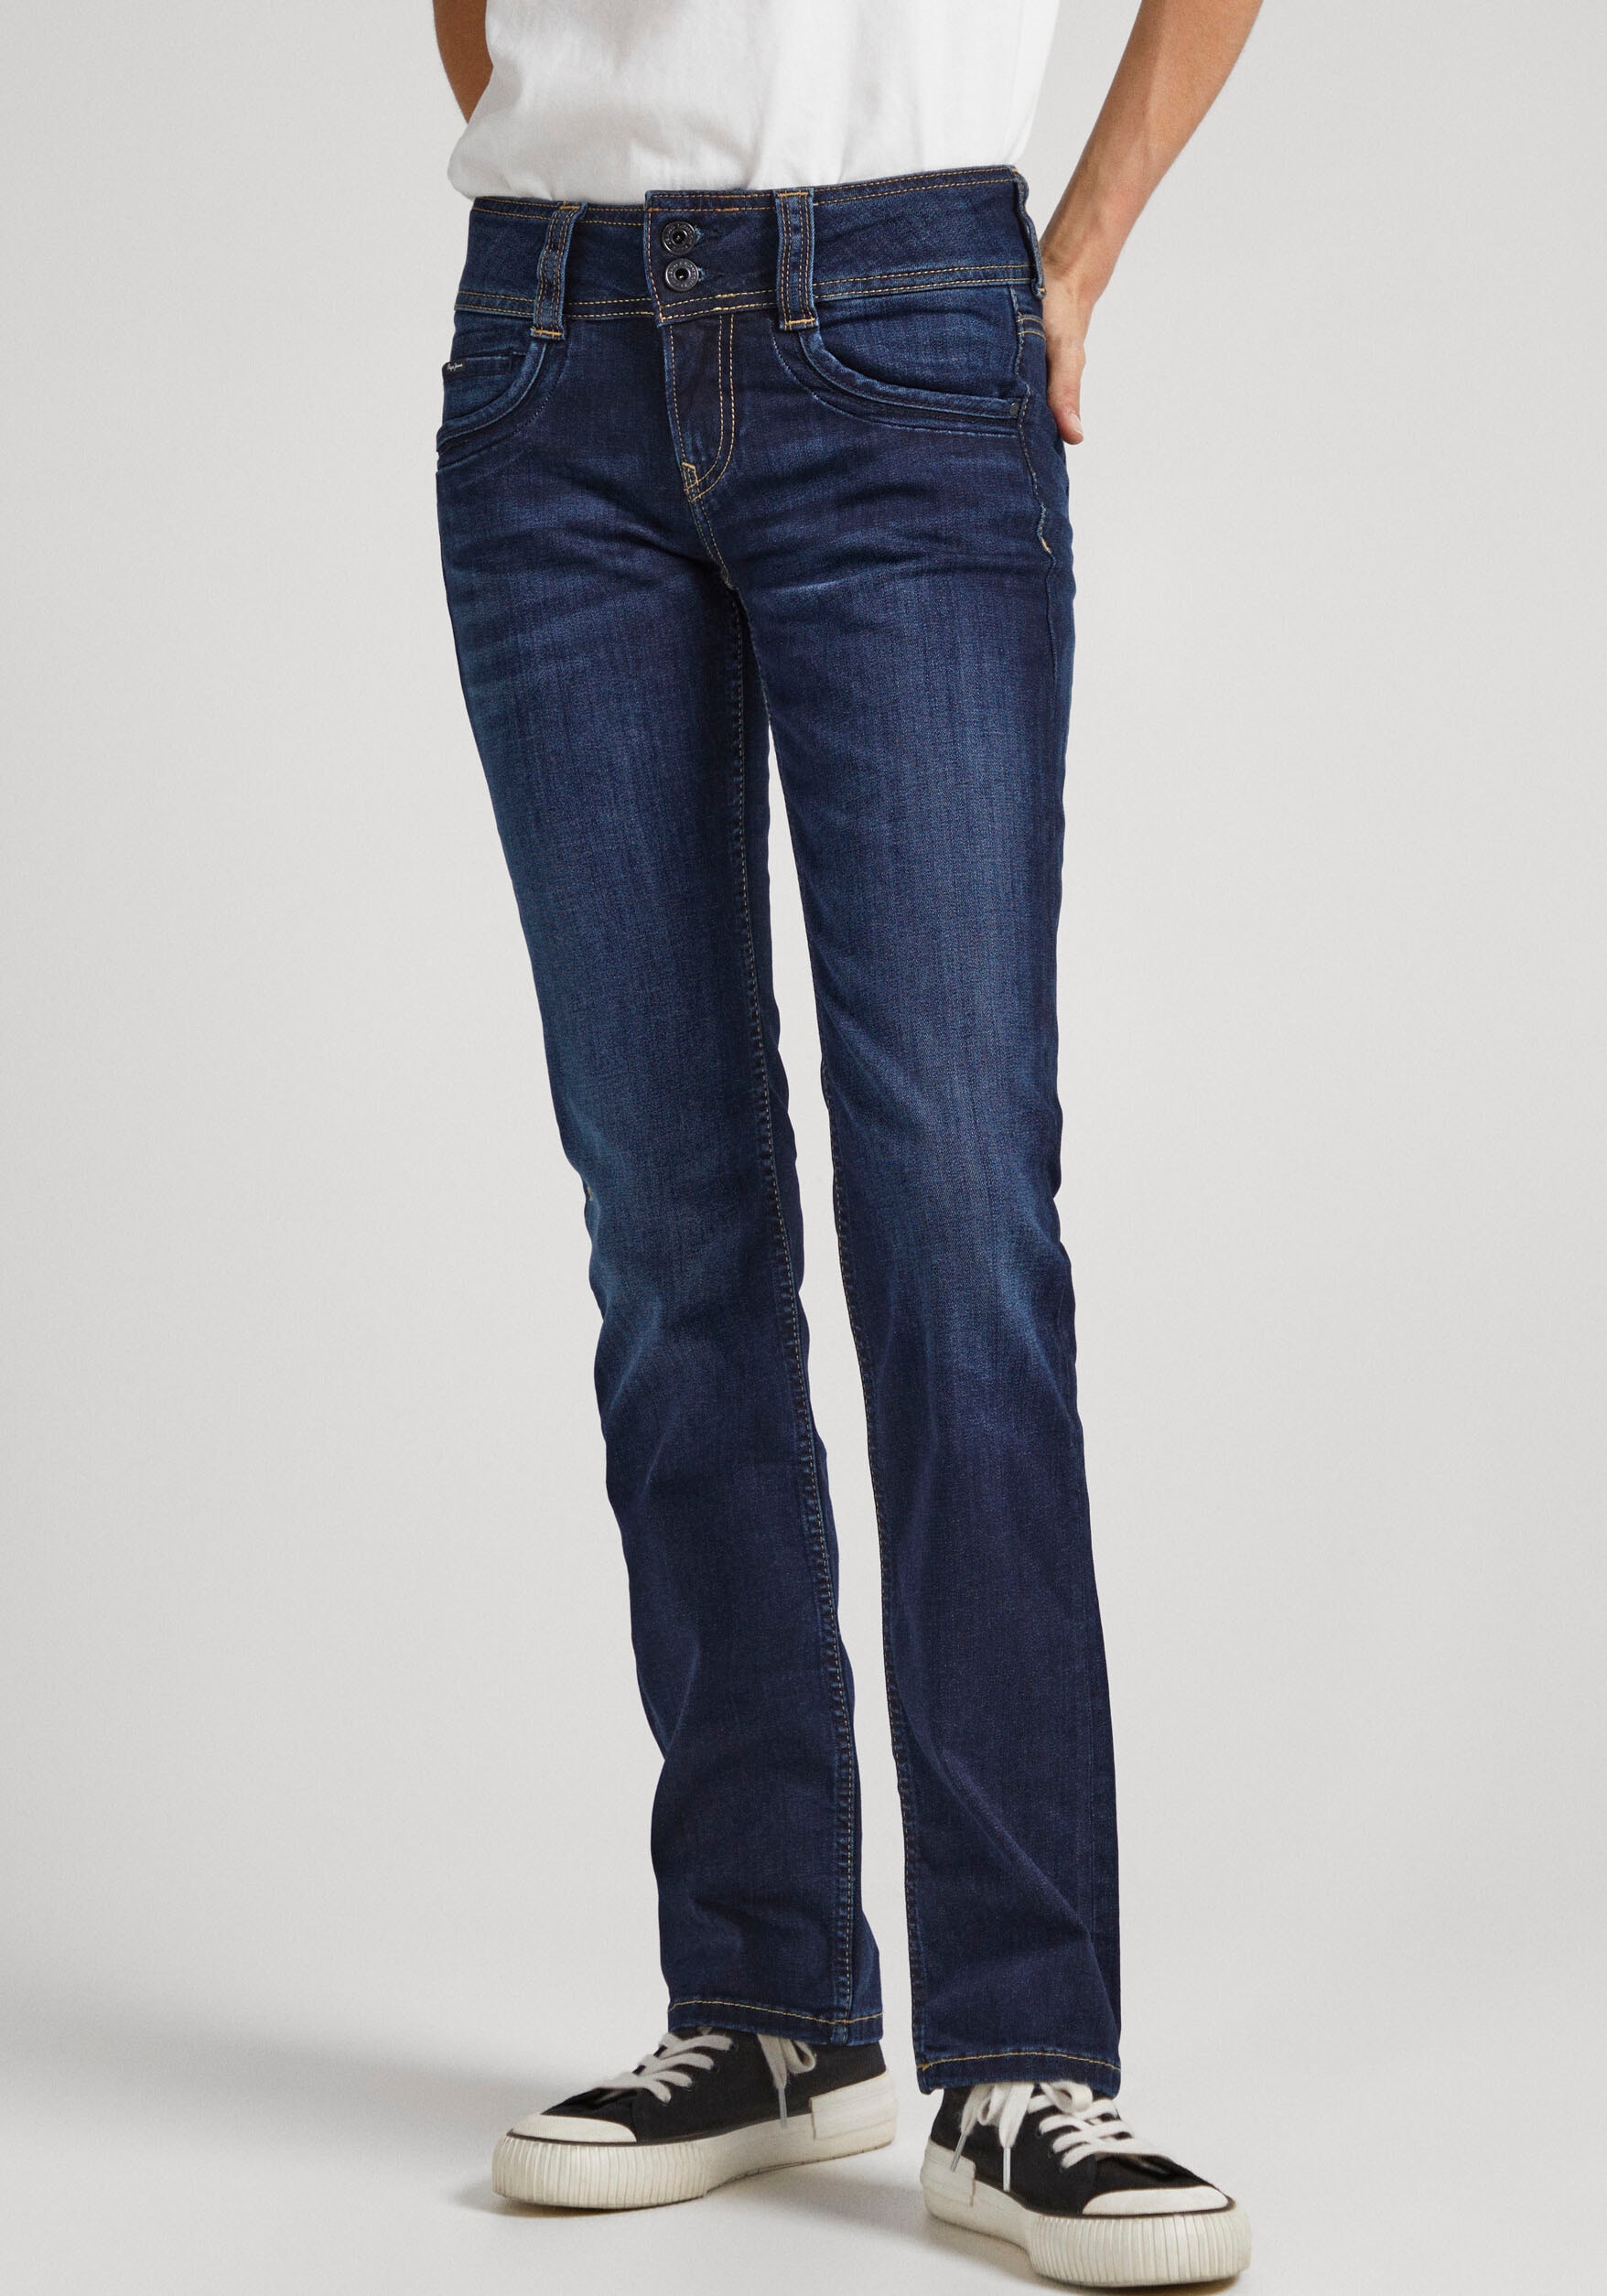 Pepe Jeans Straight-Jeans »GEN« von Pepe Jeans